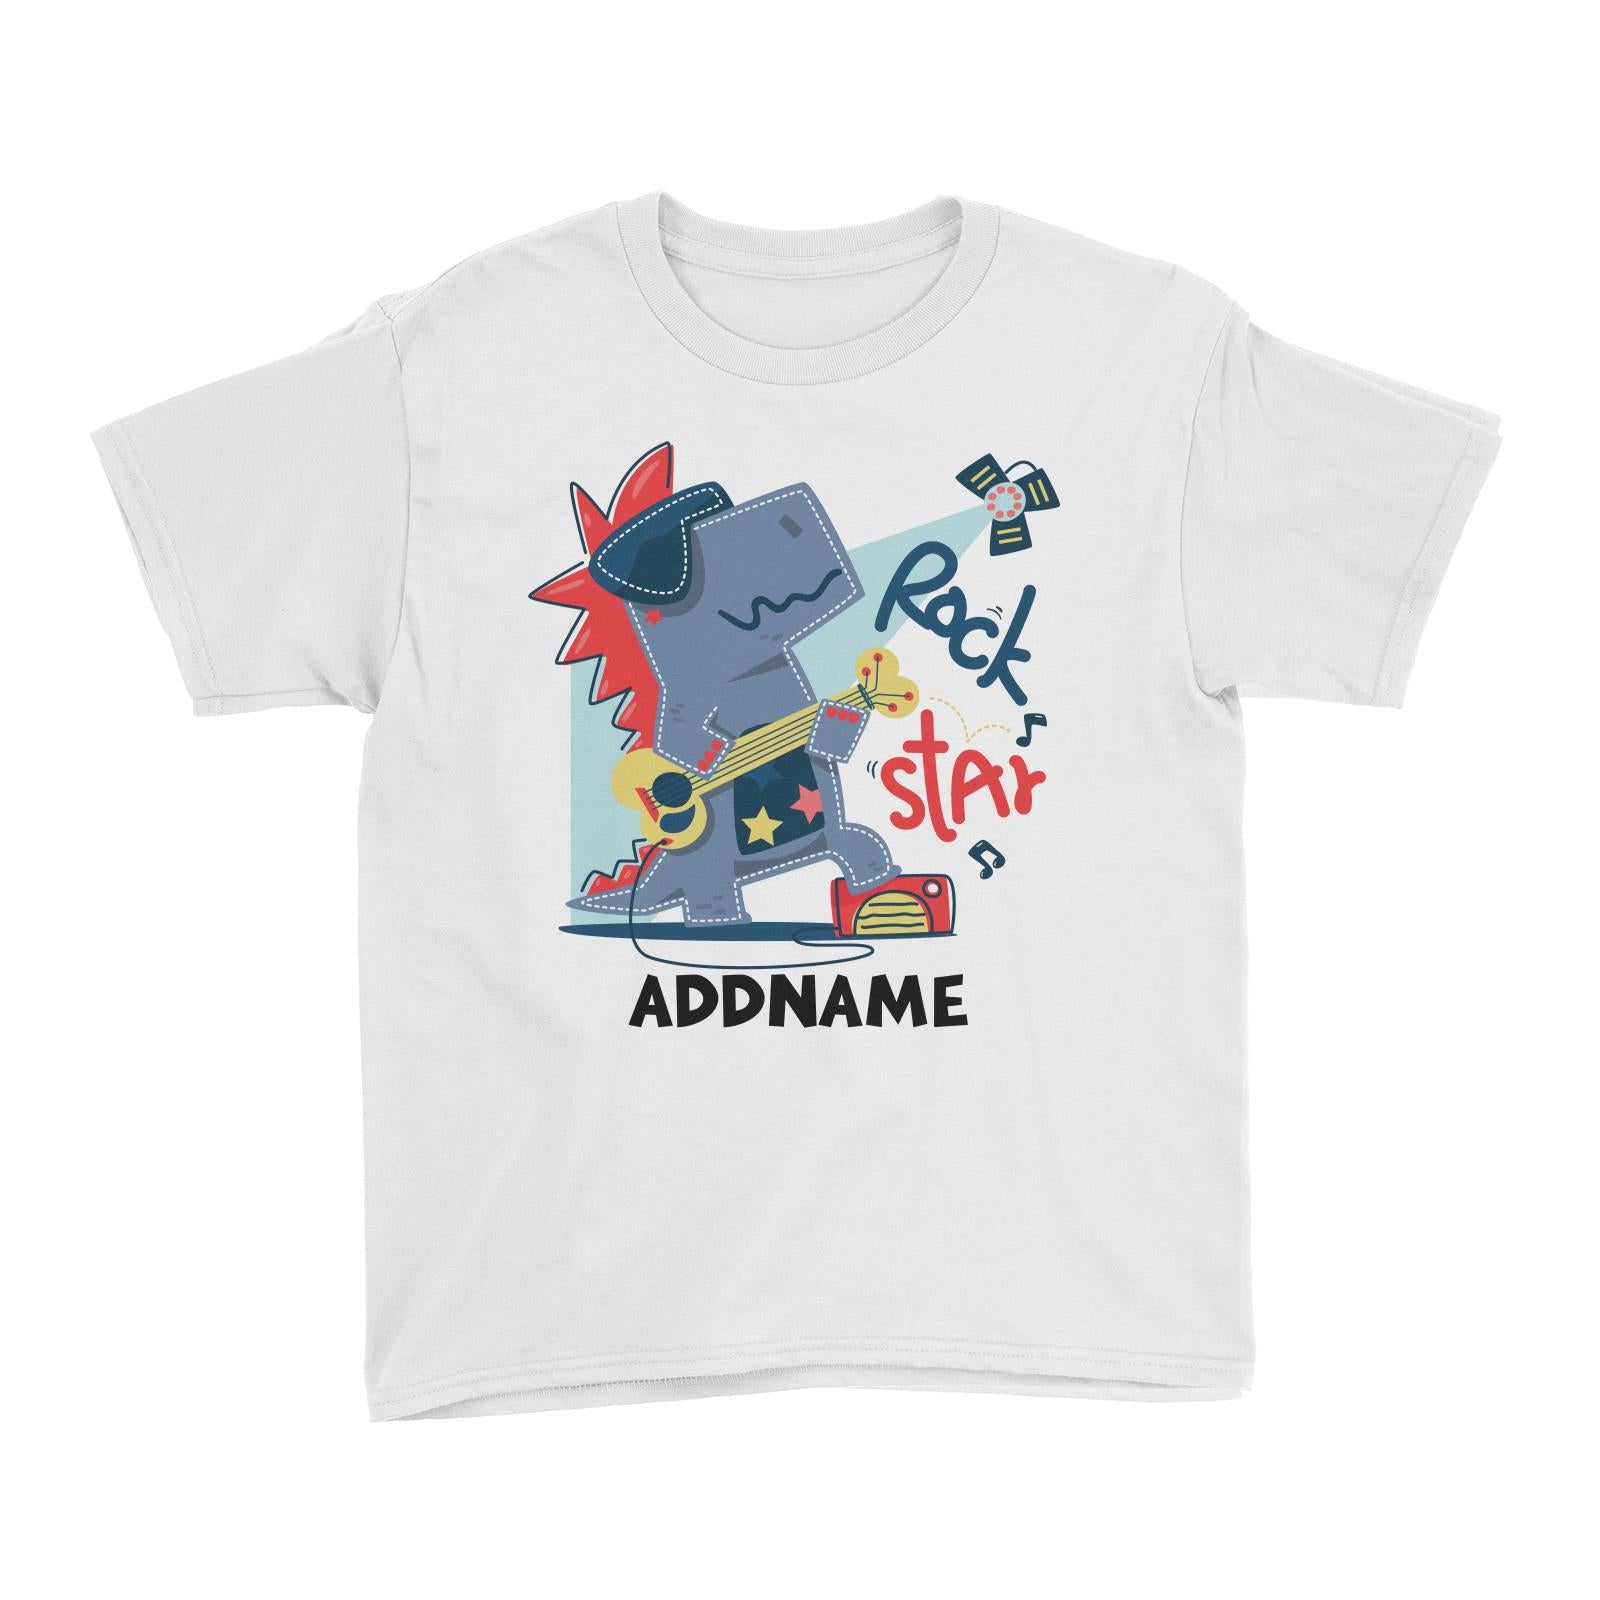 Rock Star Dinosaur with Guitar Addname Kid's T-Shirt